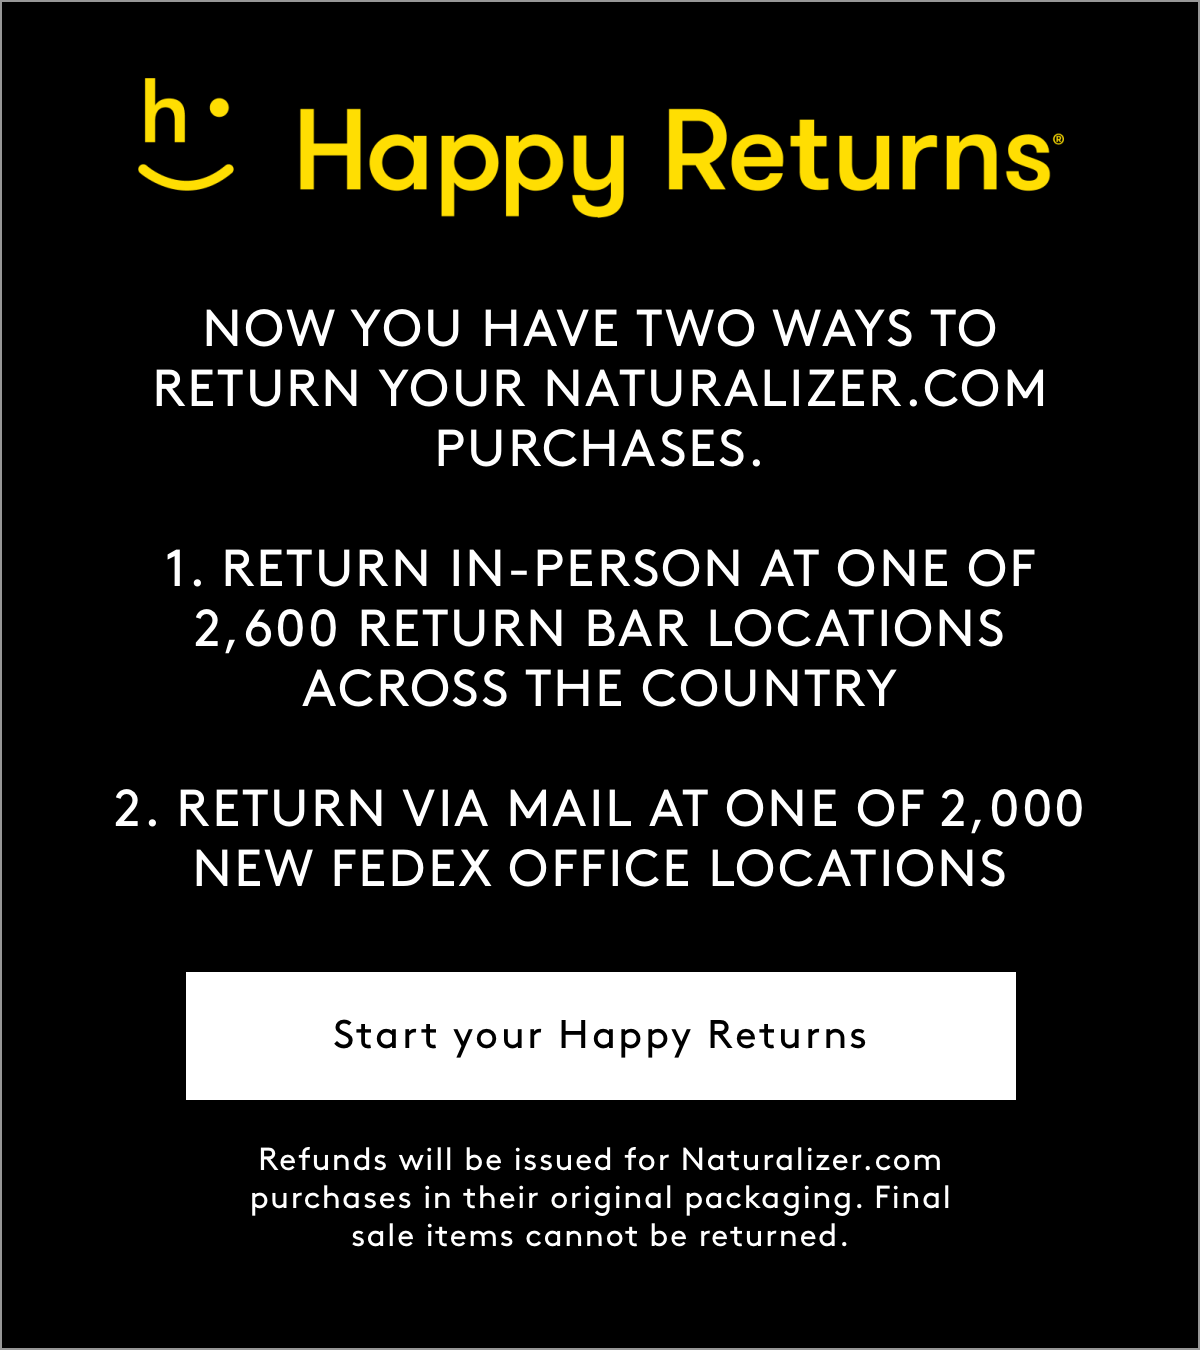 Happy Returns  NOW YOU HAVE TWO WAYS TO RETURN YOUR NATURALIZER.COM PURCHASES. 1. RETURN IN-PERSON AT ONE OF 2,600 RETURN BAR LOCATIONS ACROSS THE COUNTRY 2. RETURN VIA MAIL AT ONE OF 2,000 NEW FEDEX OFFICE LOCATIONS Start your Happy Returns Refunds will be issued for Naturalizer.com purchases in their original packaging. Final sale items cannot be returned.